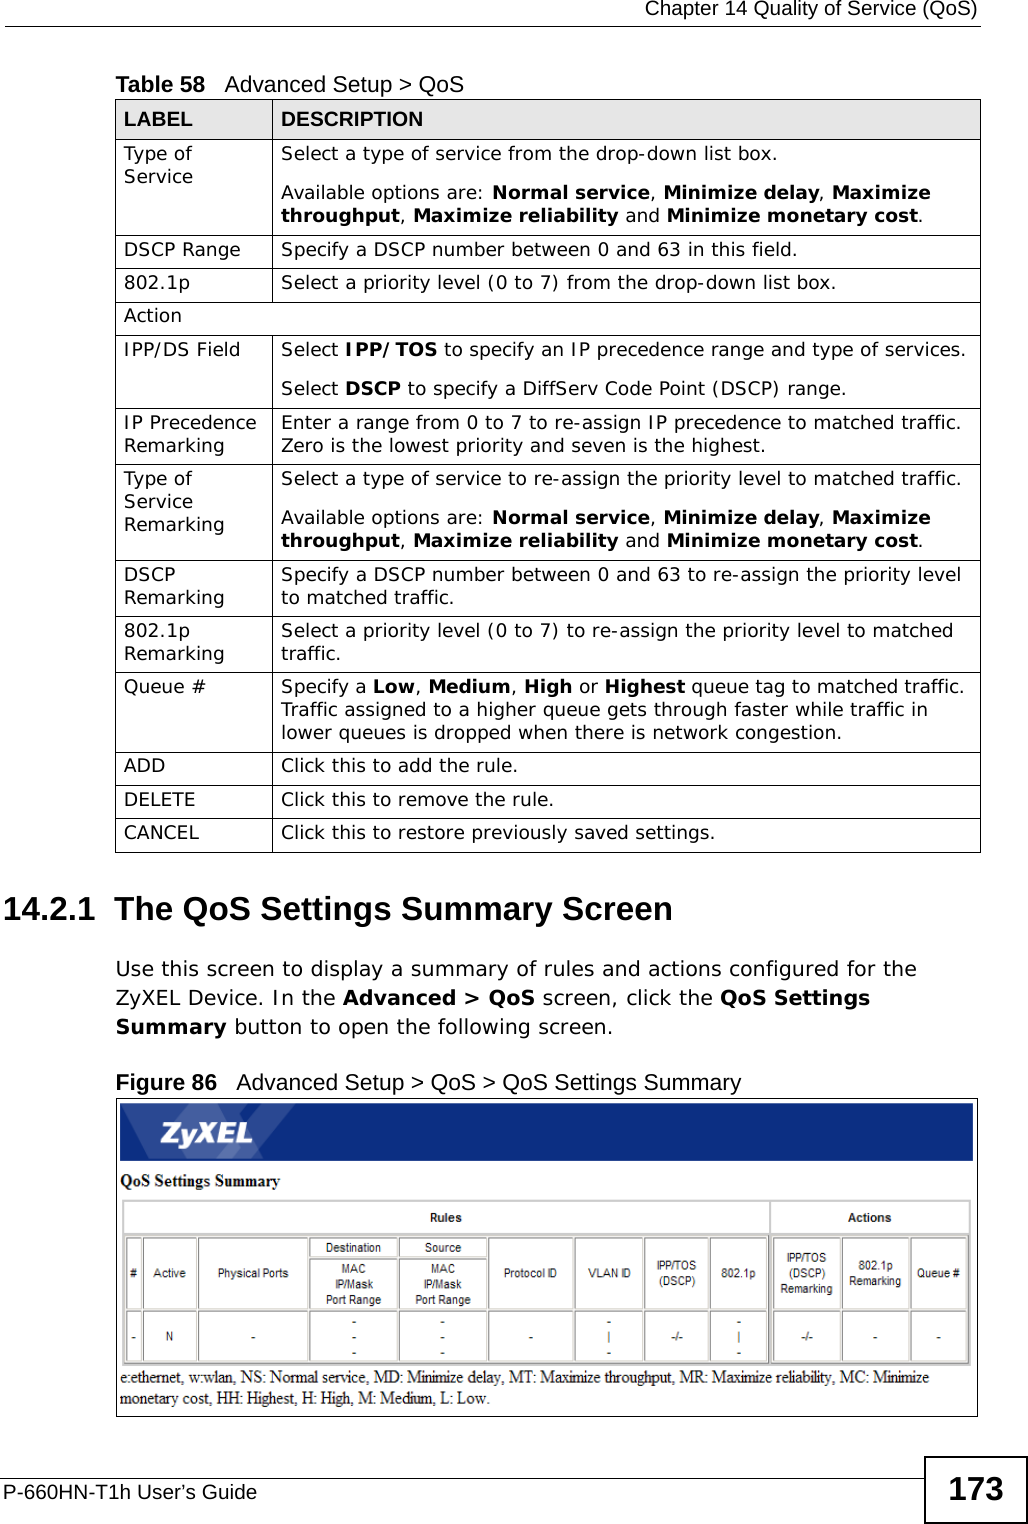  Chapter 14 Quality of Service (QoS)P-660HN-T1h User’s Guide 17314.2.1  The QoS Settings Summary Screen Use this screen to display a summary of rules and actions configured for the ZyXEL Device. In the Advanced &gt; QoS screen, click the QoS Settings Summary button to open the following screen.Figure 86   Advanced Setup &gt; QoS &gt; QoS Settings SummaryType of Service Select a type of service from the drop-down list box.Available options are: Normal service, Minimize delay, Maximize throughput, Maximize reliability and Minimize monetary cost.DSCP Range Specify a DSCP number between 0 and 63 in this field.802.1p Select a priority level (0 to 7) from the drop-down list box.ActionIPP/DS Field Select IPP/TOS to specify an IP precedence range and type of services.Select DSCP to specify a DiffServ Code Point (DSCP) range.IP Precedence Remarking Enter a range from 0 to 7 to re-assign IP precedence to matched traffic. Zero is the lowest priority and seven is the highest.Type of Service RemarkingSelect a type of service to re-assign the priority level to matched traffic.Available options are: Normal service, Minimize delay, Maximize throughput, Maximize reliability and Minimize monetary cost.DSCP Remarking Specify a DSCP number between 0 and 63 to re-assign the priority level to matched traffic.802.1p Remarking Select a priority level (0 to 7) to re-assign the priority level to matched traffic.Queue # Specify a Low, Medium, High or Highest queue tag to matched traffic. Traffic assigned to a higher queue gets through faster while traffic in lower queues is dropped when there is network congestion.ADD Click this to add the rule.DELETE Click this to remove the rule.CANCEL Click this to restore previously saved settings.Table 58   Advanced Setup &gt; QoSLABEL DESCRIPTION